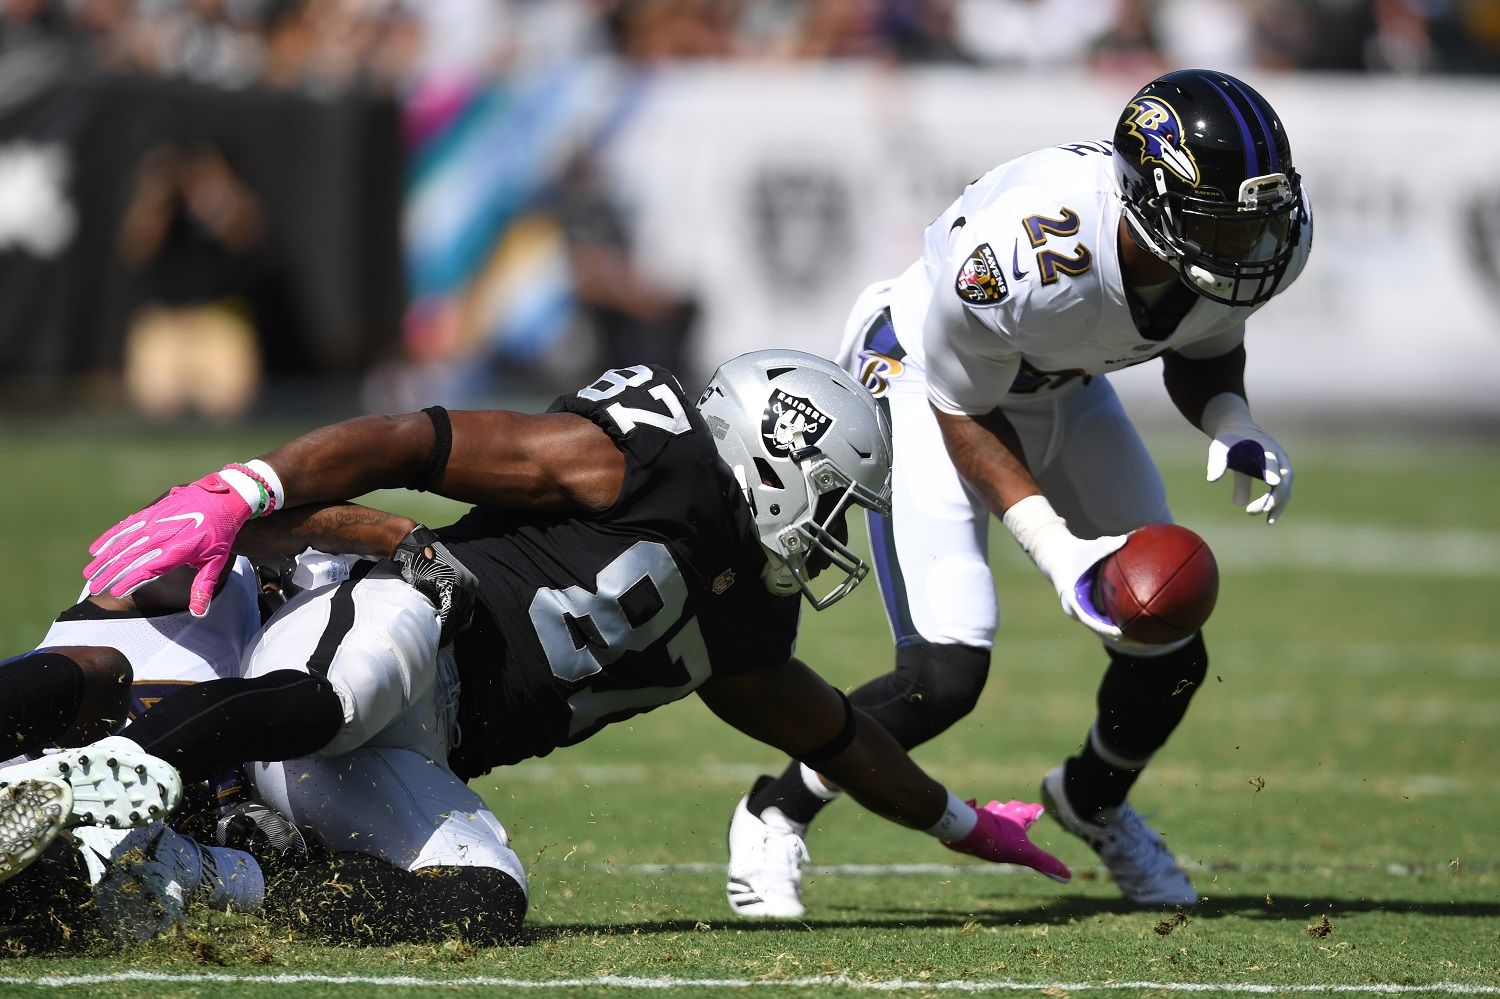 OAKLAND, CA - OCTOBER 08:  Jimmy Smith #22 of the Baltimore Ravens returns a recovered fumble by Jared Cook #87 of the Oakland Raiders for a touchdown during their NFL game at Oakland-Alameda County Coliseum on October 8, 2017 in Oakland, California.  (Photo by Thearon W. Henderson/Getty Images)